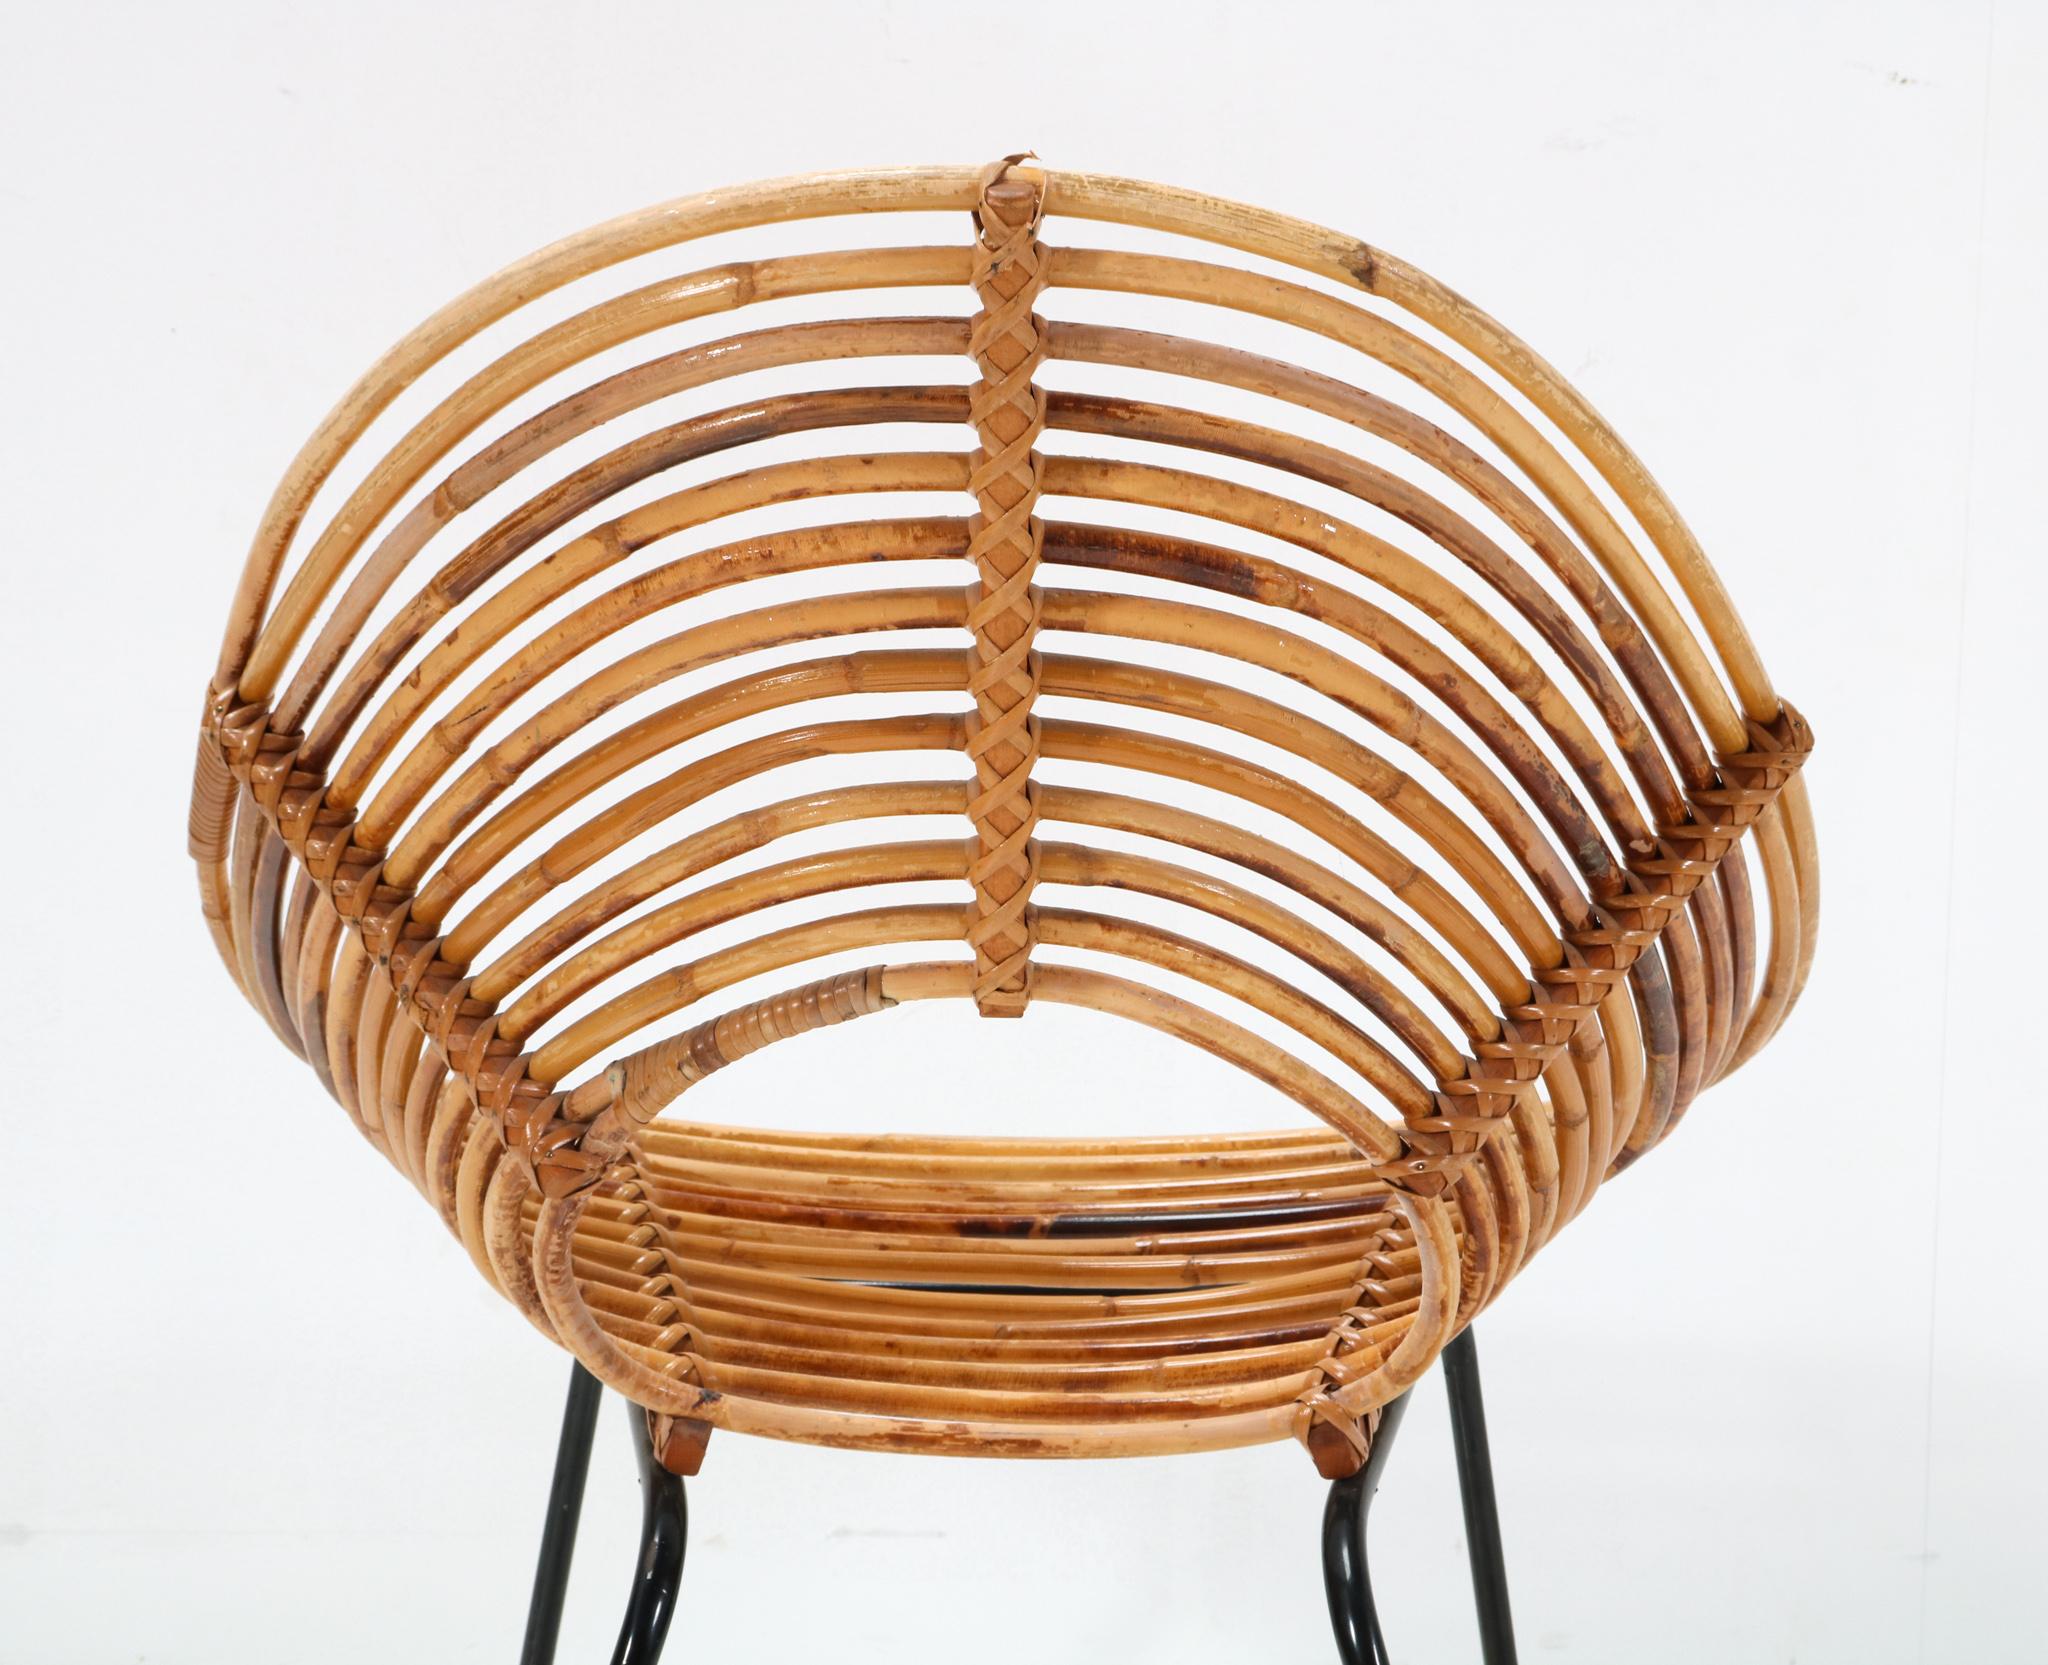 Rattan Mid-Century Modern Lounge Chair by Dirk van Sliedregt for Rohe, 1950s For Sale 2